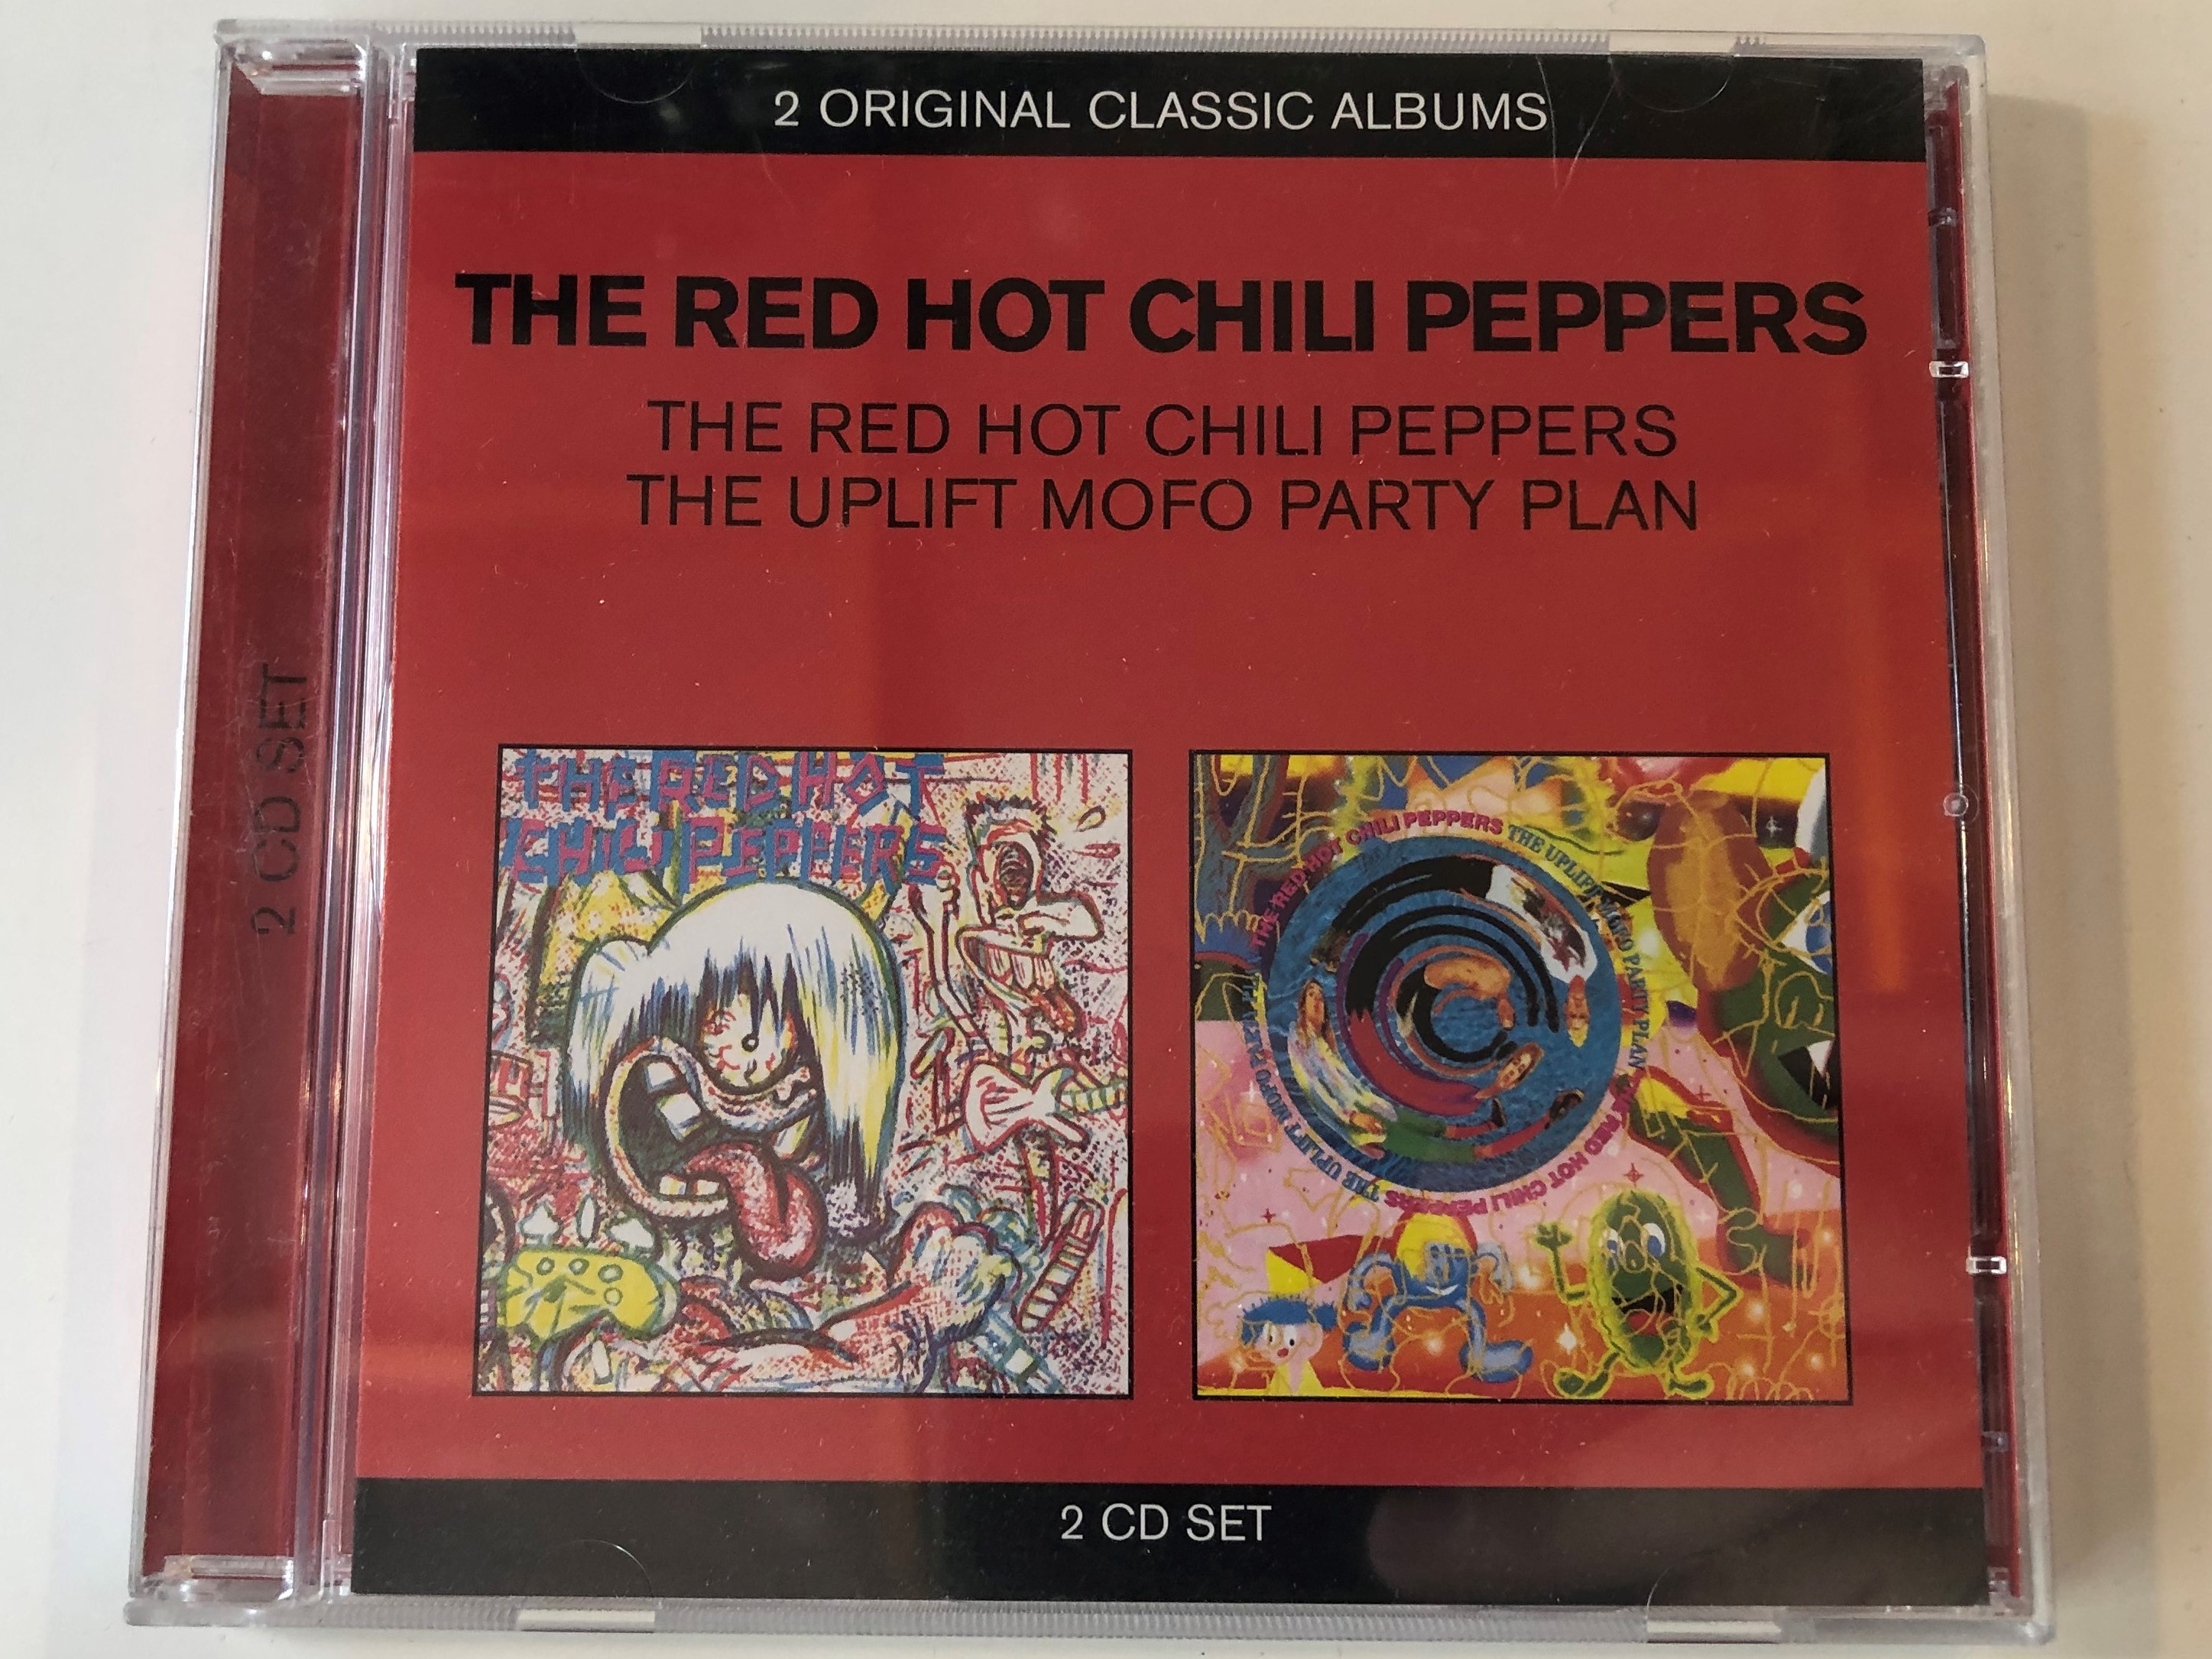 the-red-hot-chili-peppers-the-red-hot-chili-peppers-the-uplift-mofo-party-plan-2-original-classic-albums-emi-audio-cd-2003-5099909528321-1-.jpg